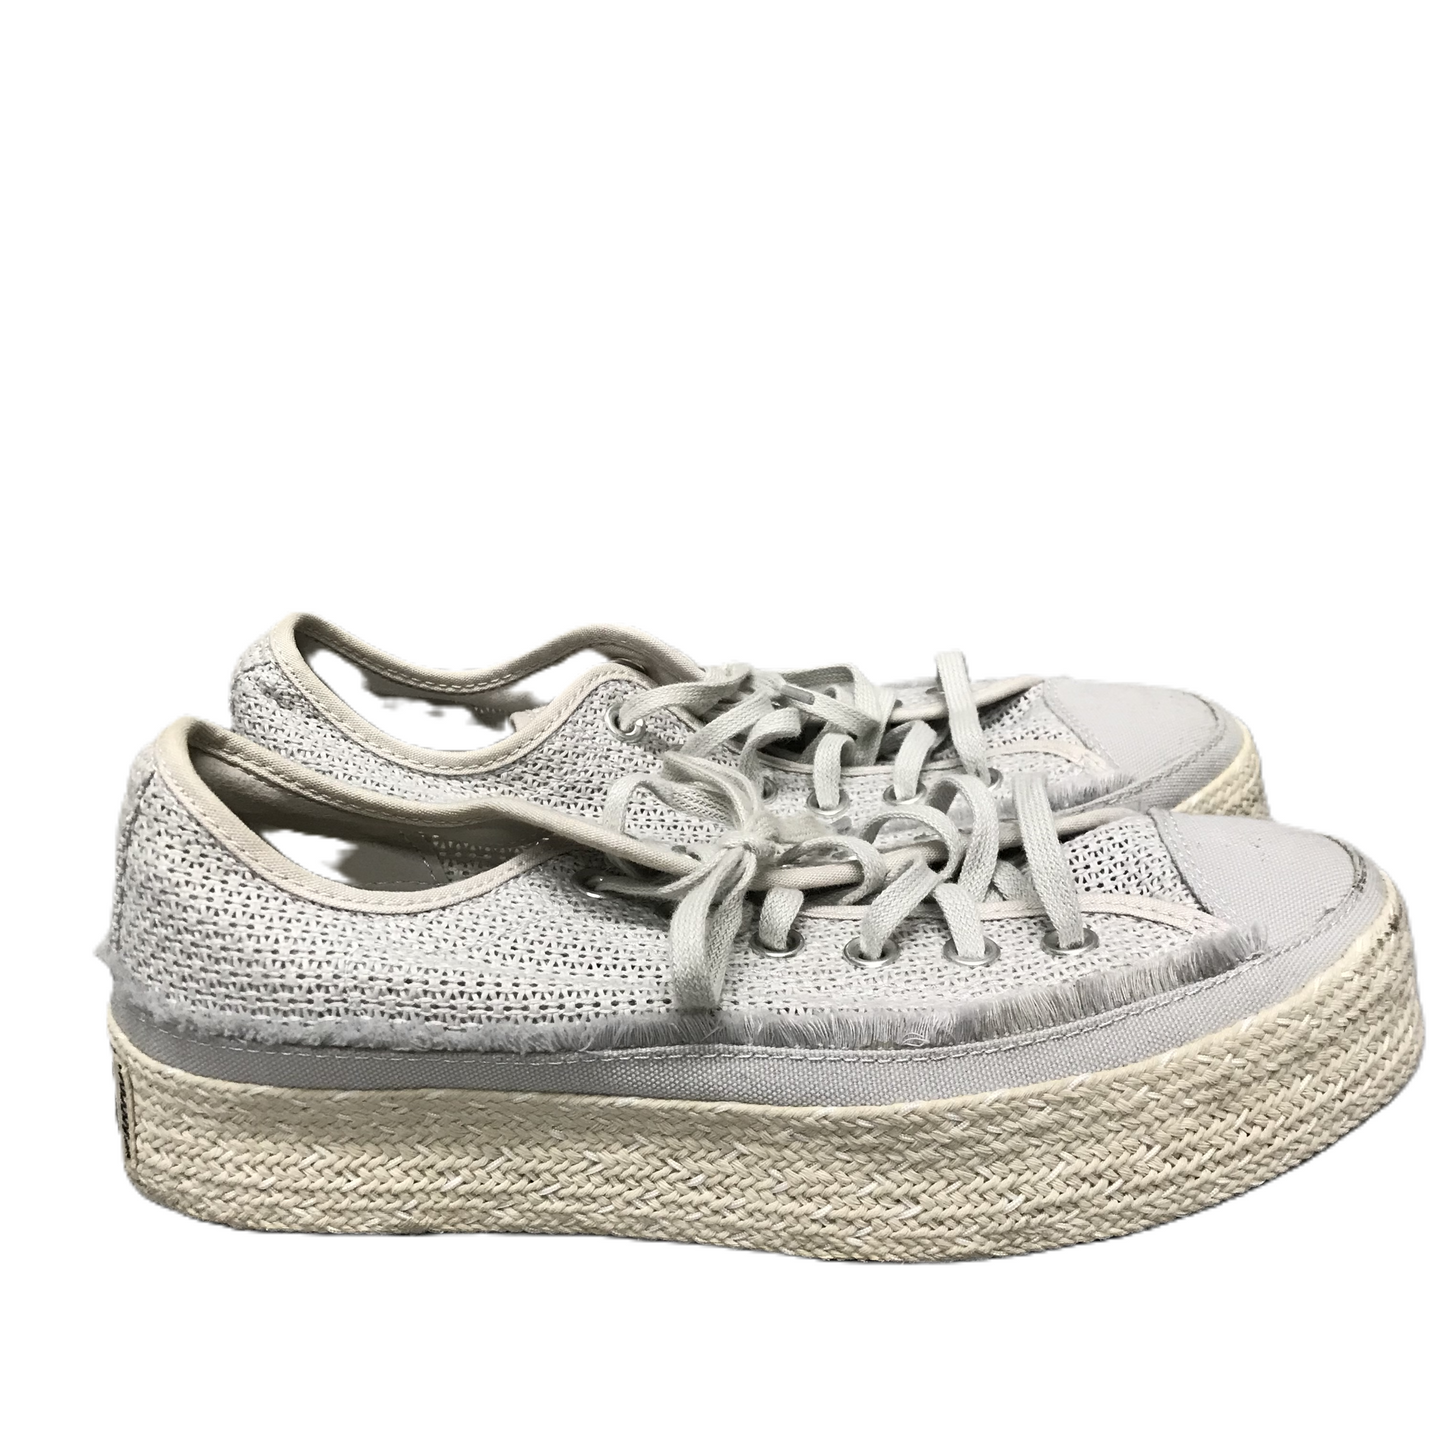 Grey Shoes Sneakers Platform By Converse, Size: 8